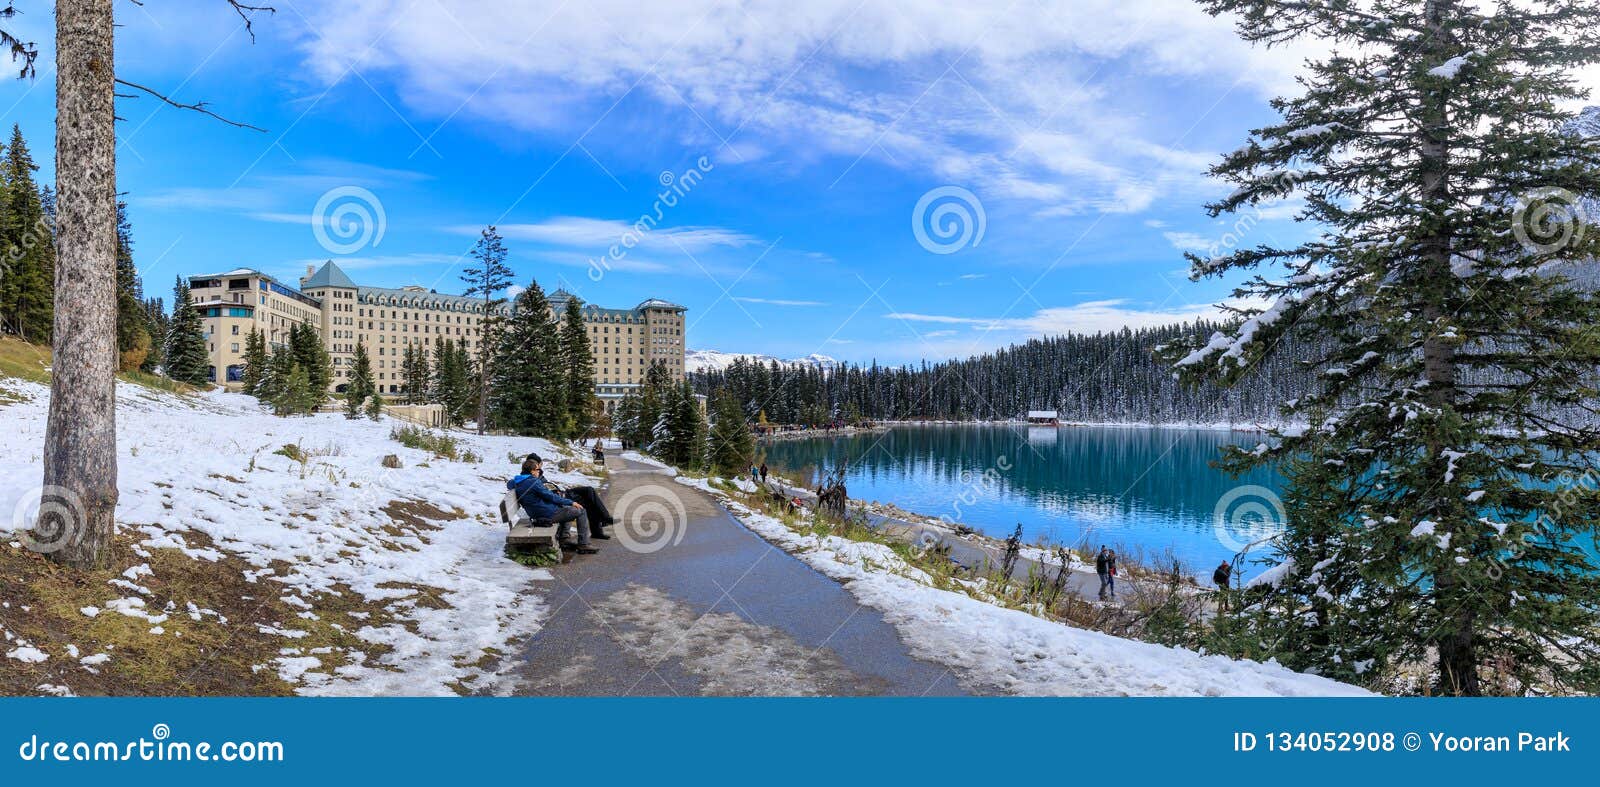 Famous Fairmont Chateau Lake Louise Hotel In The Banff National Park Editorial Stock Photo ...